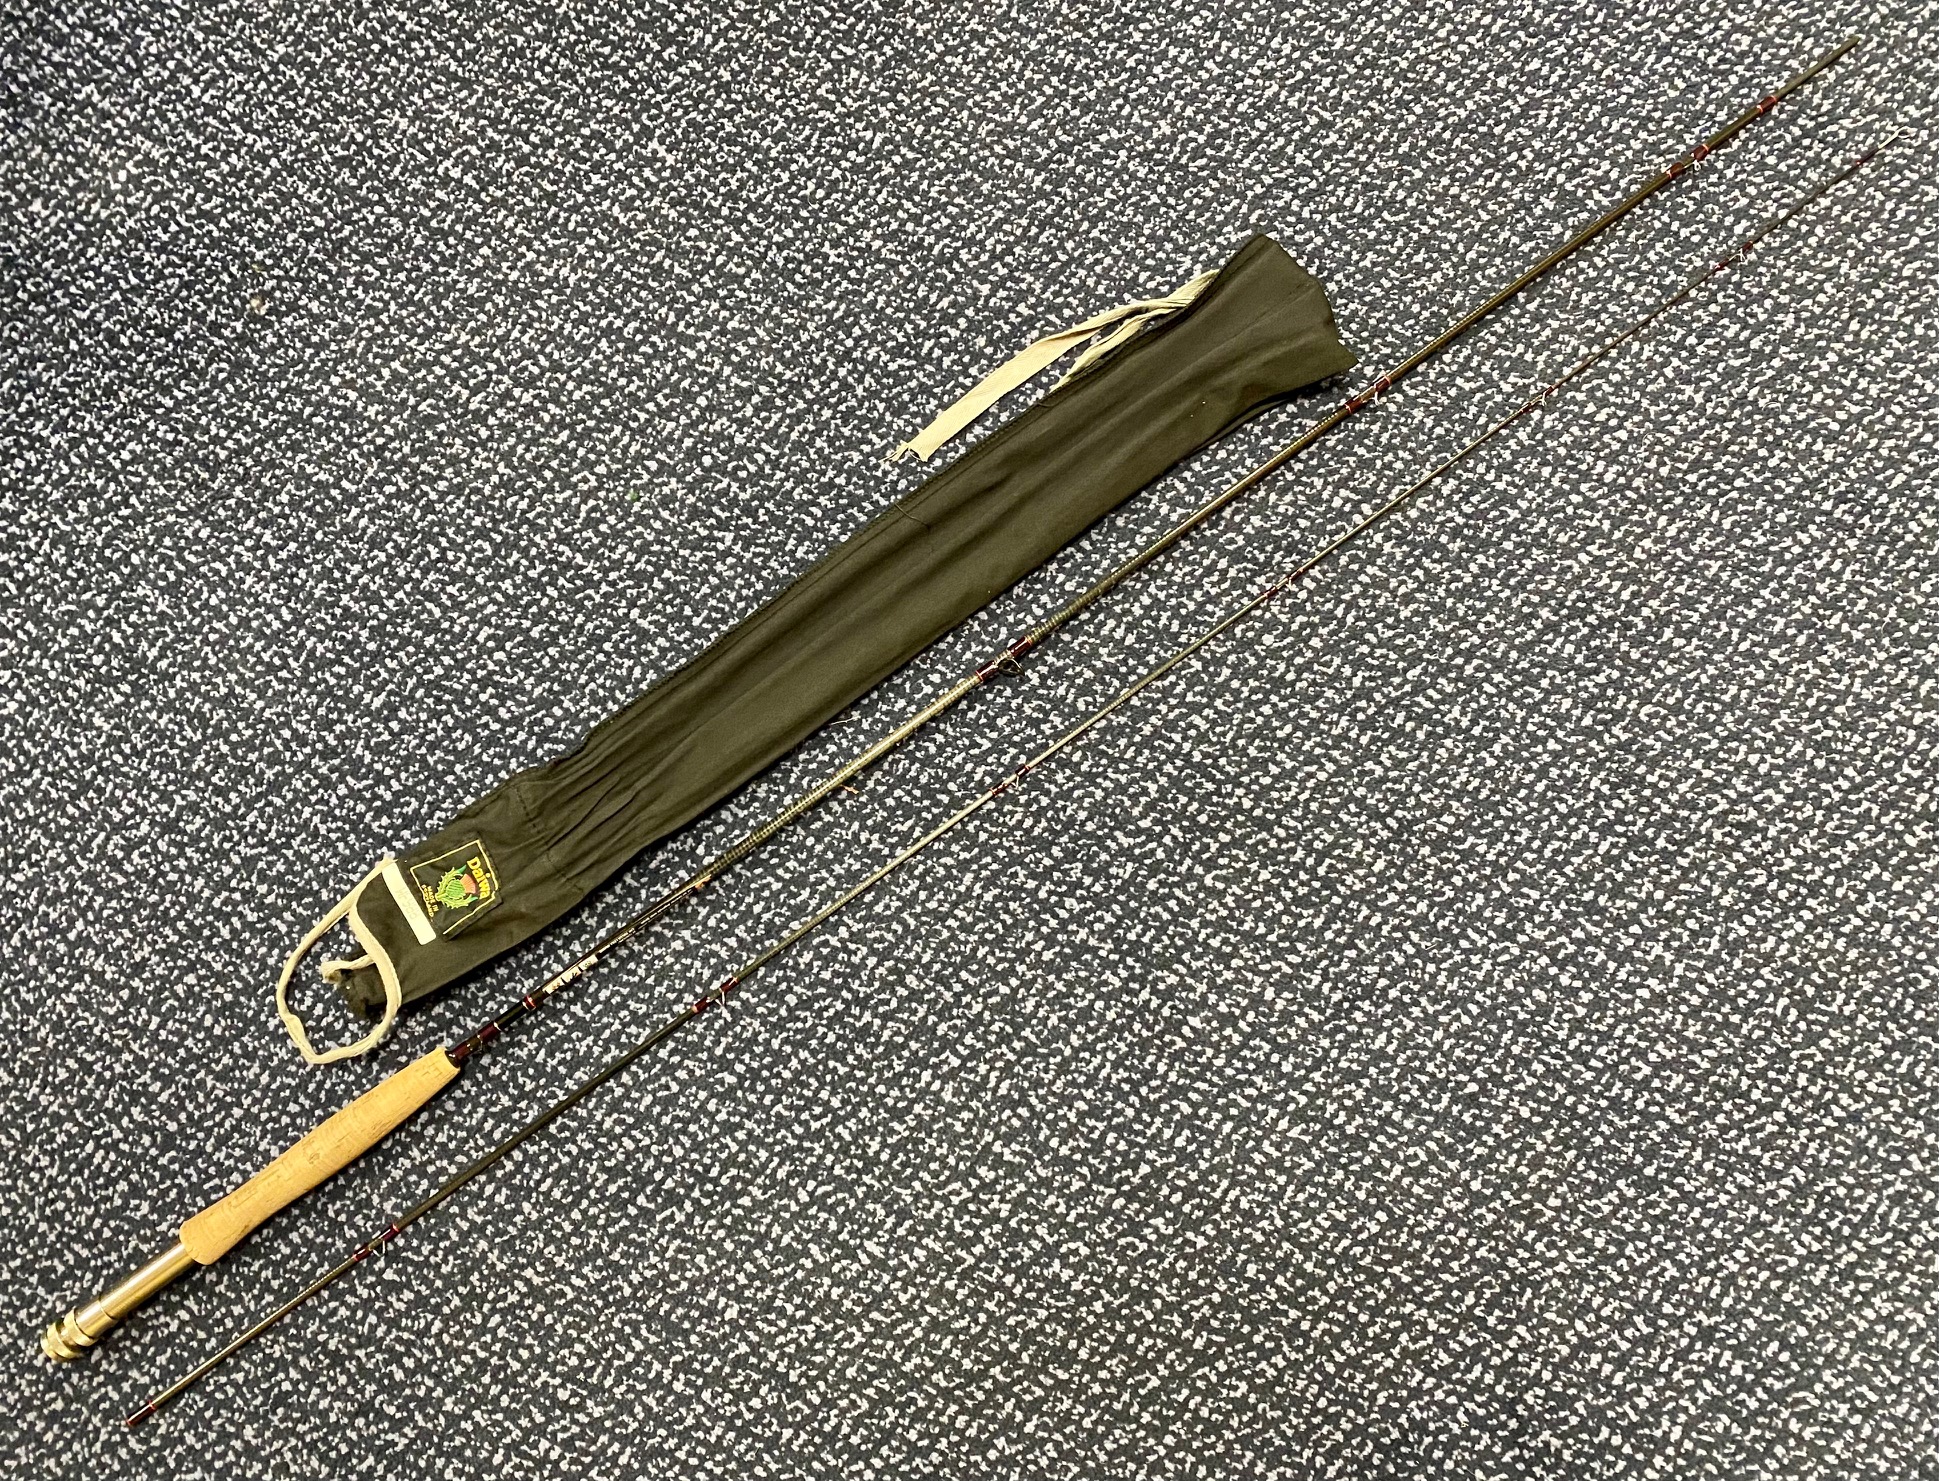 Whisker WF98 8ft #4/5 Trout Fly Rod 2 Piece (Scotland) (in bag)- Used